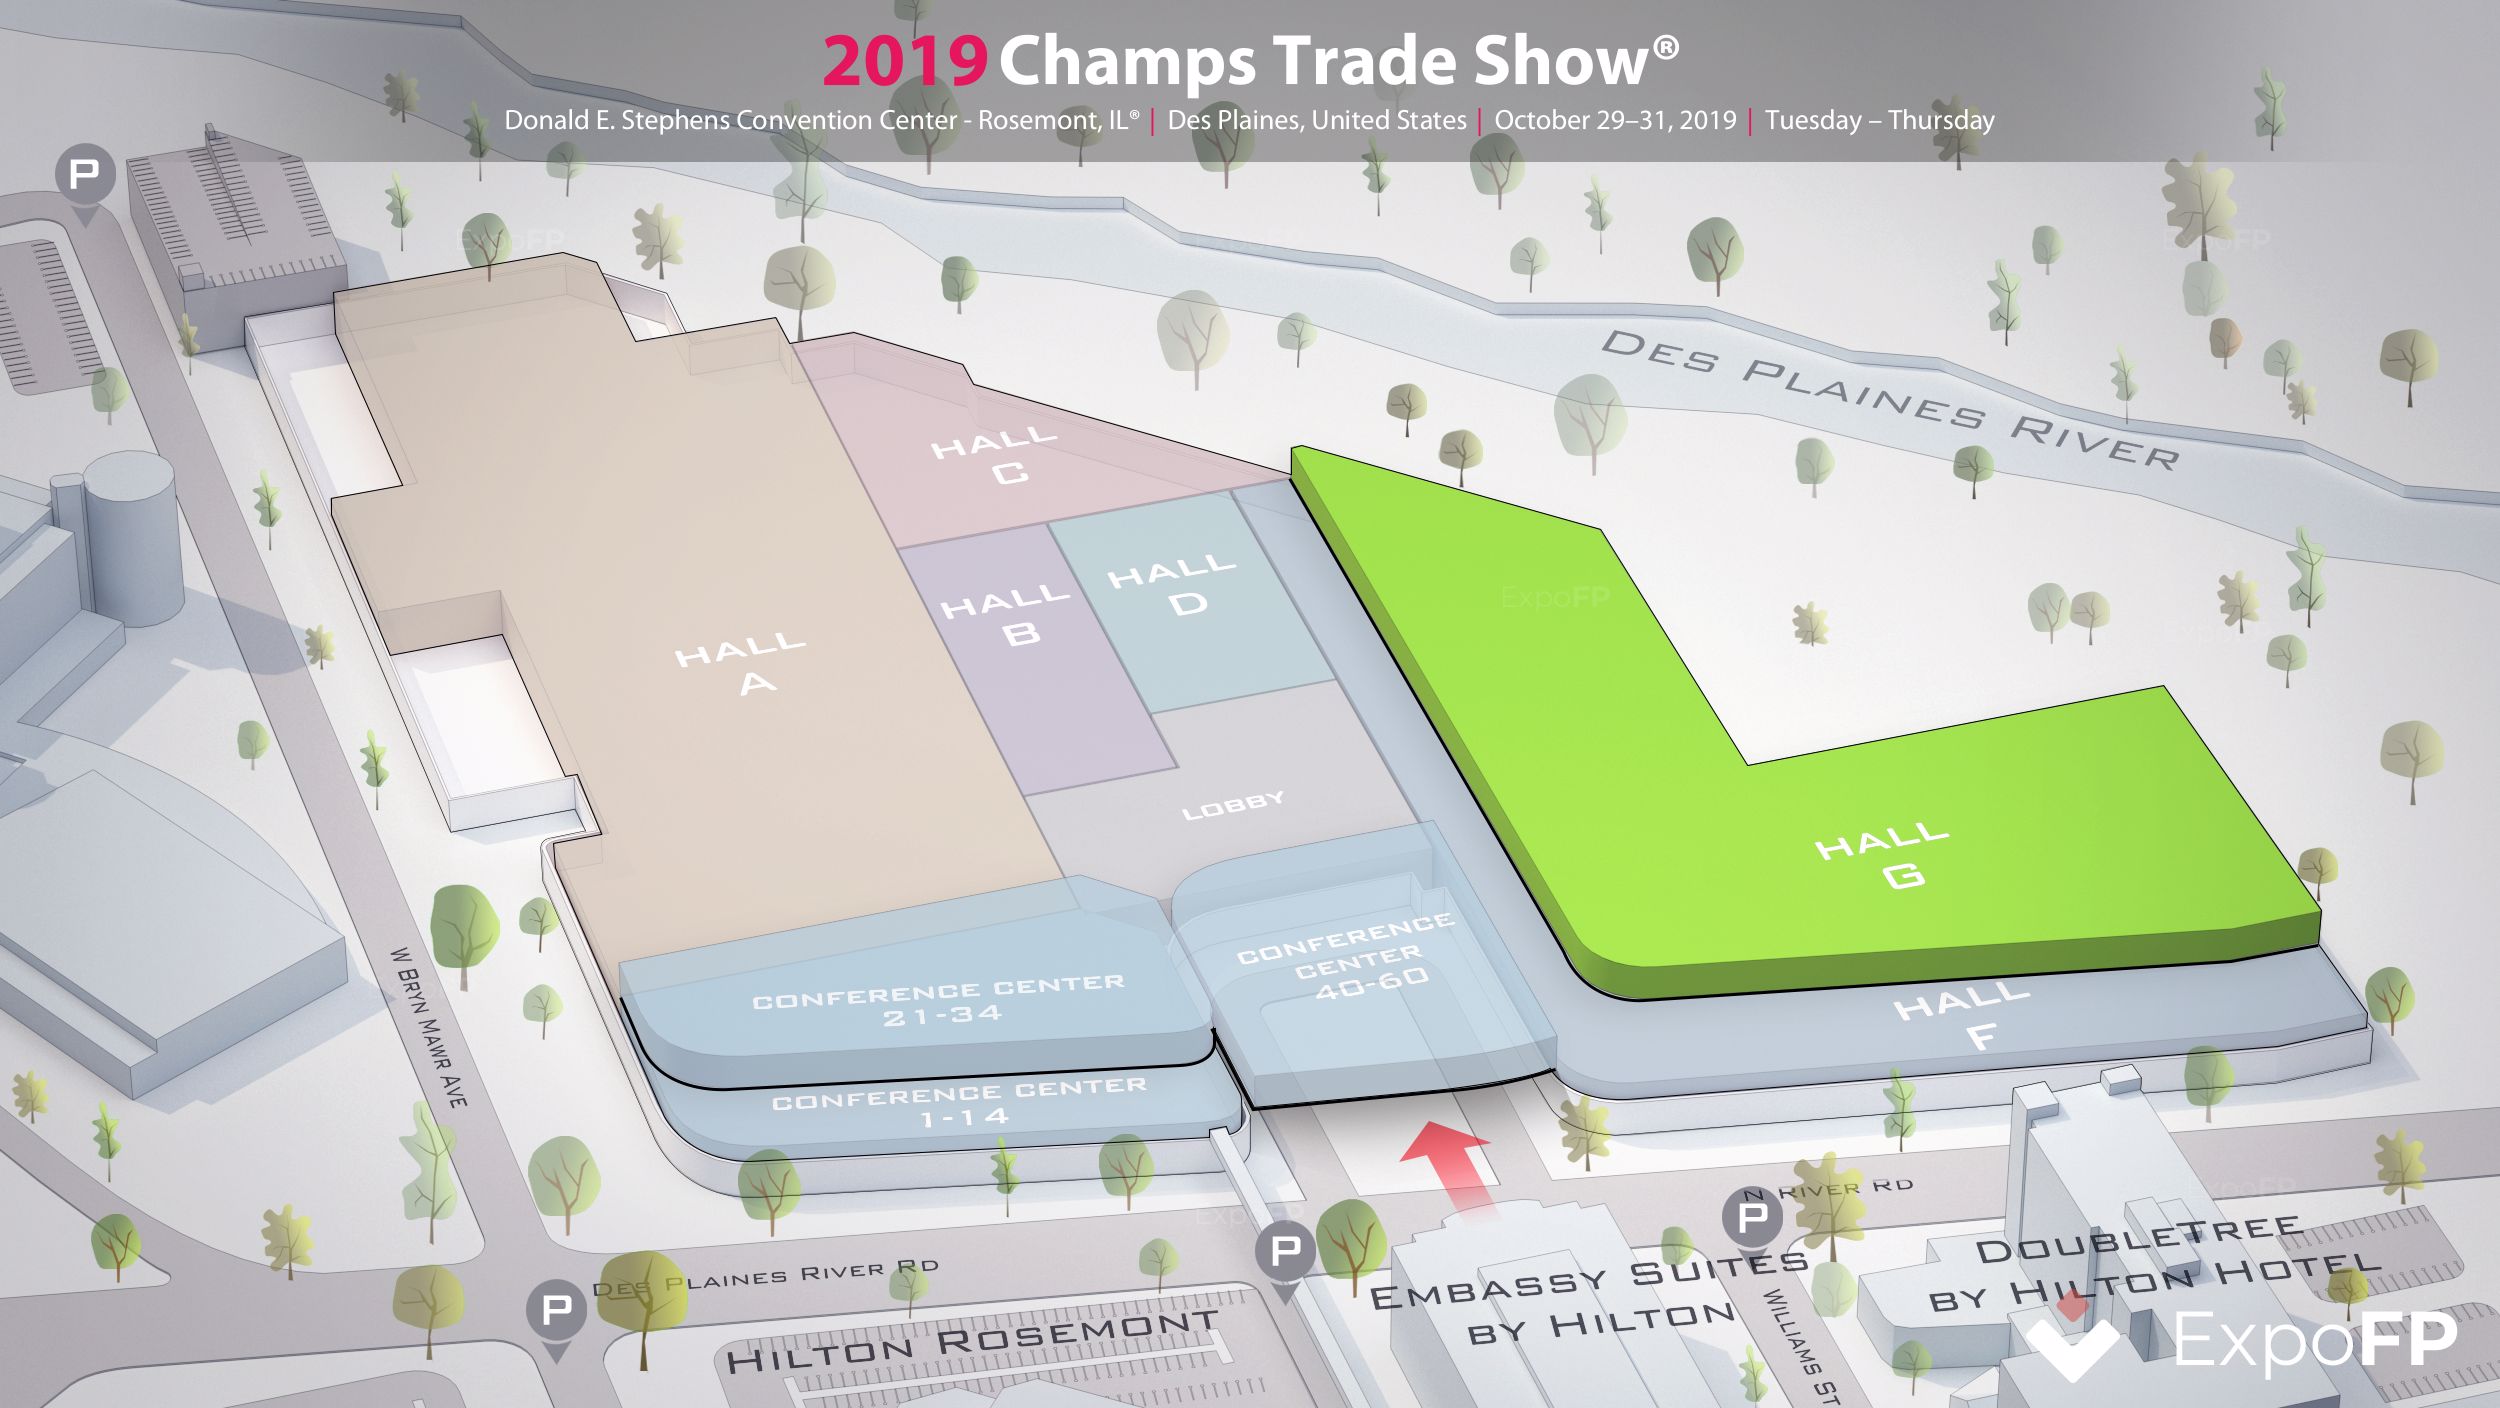 Champs Trade Show 2019 in Donald E. Stephens Convention